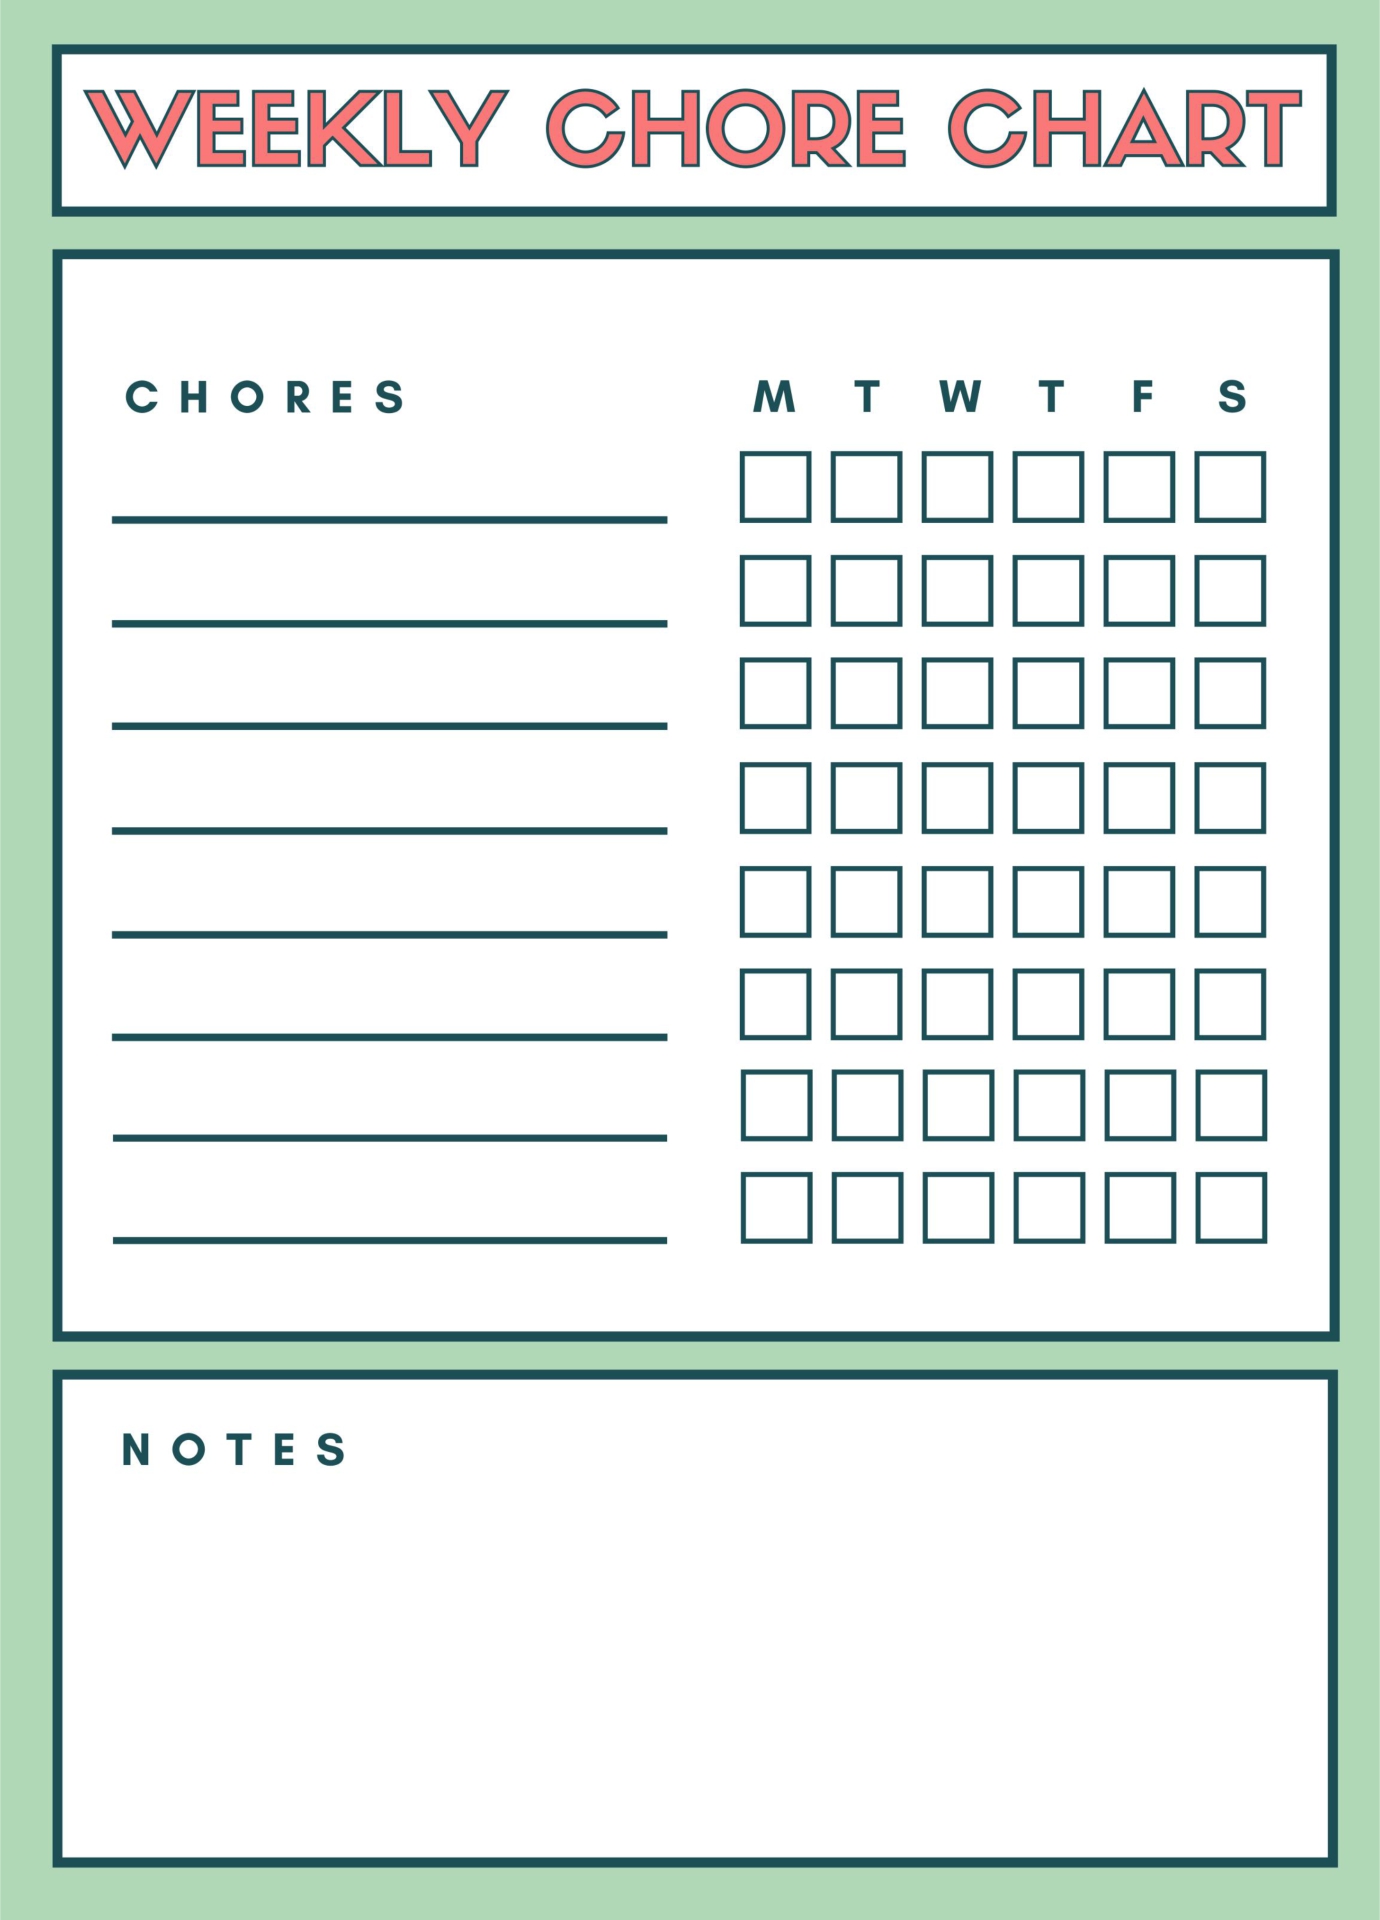 9-best-images-of-printable-weekly-chore-chart-weekly-chore-chart